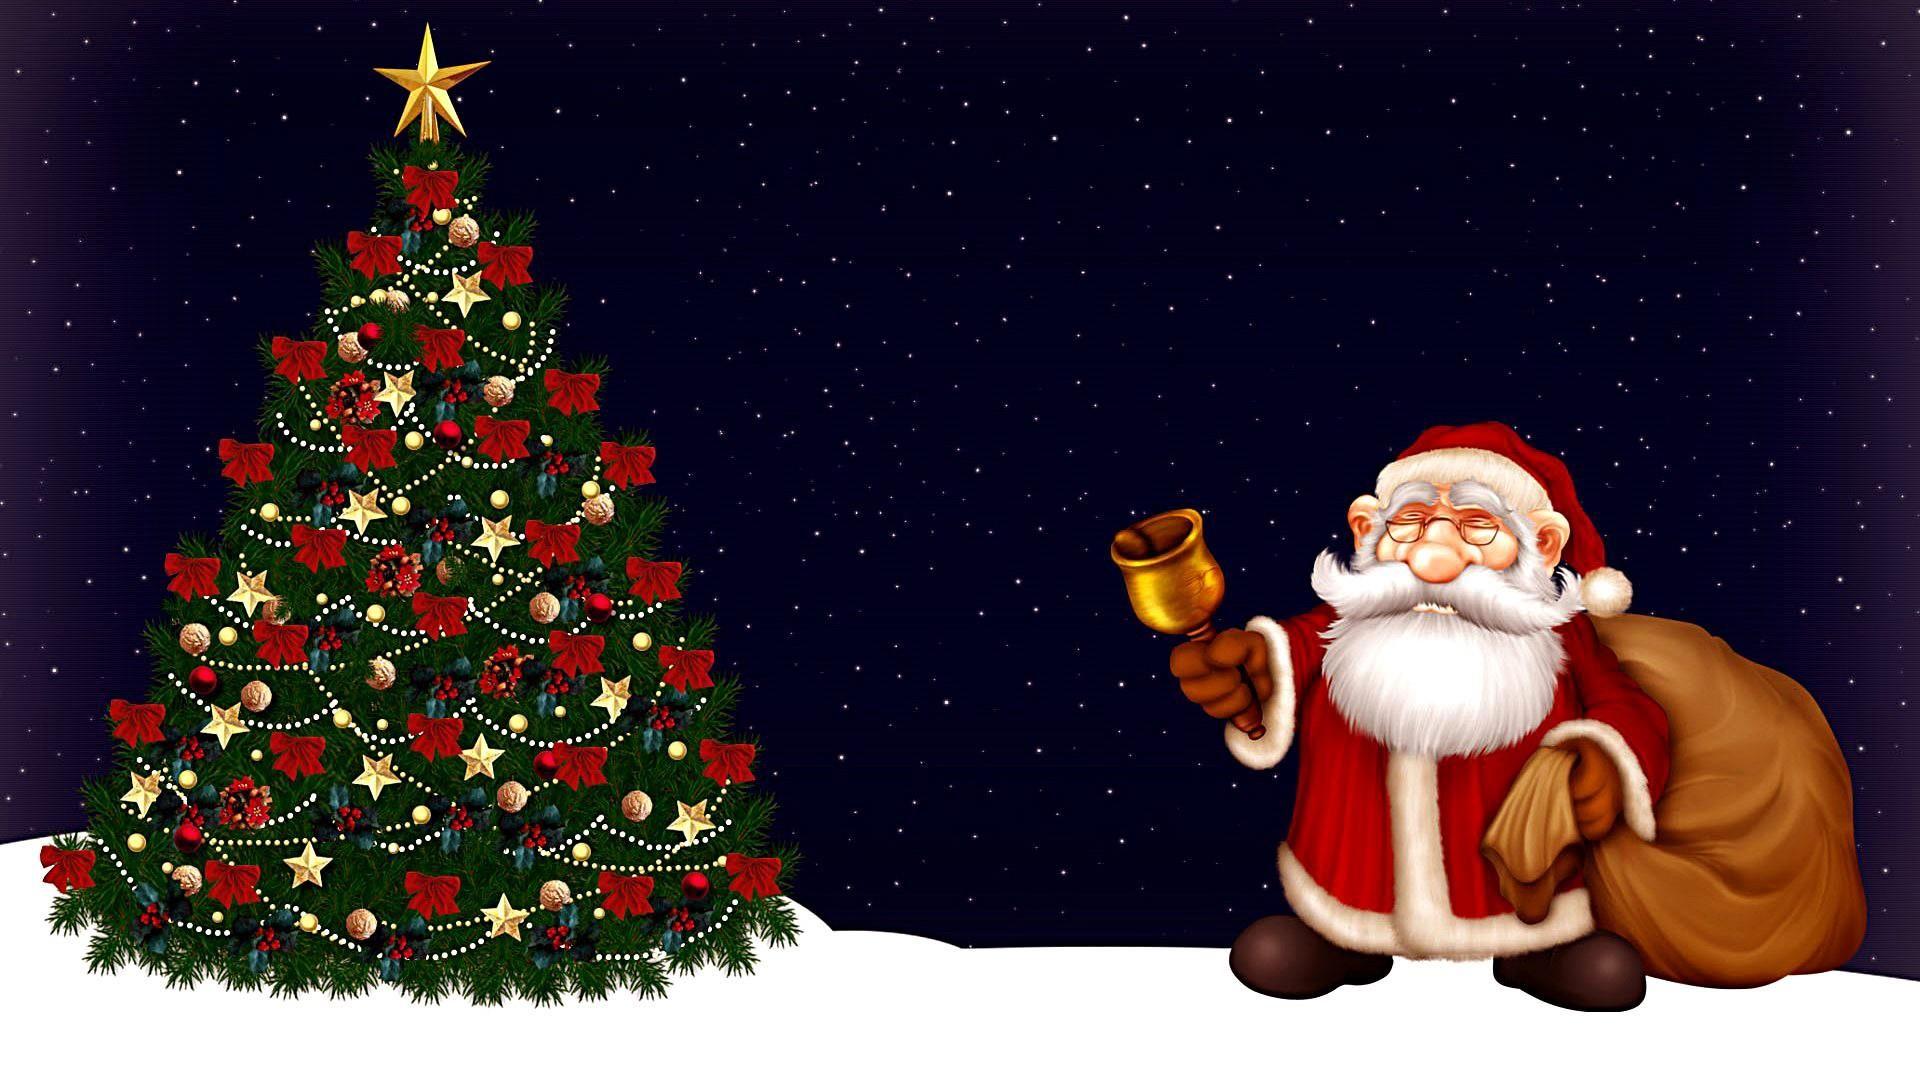 Christmas Tree & Santa Claus With Gifts Wallpaper